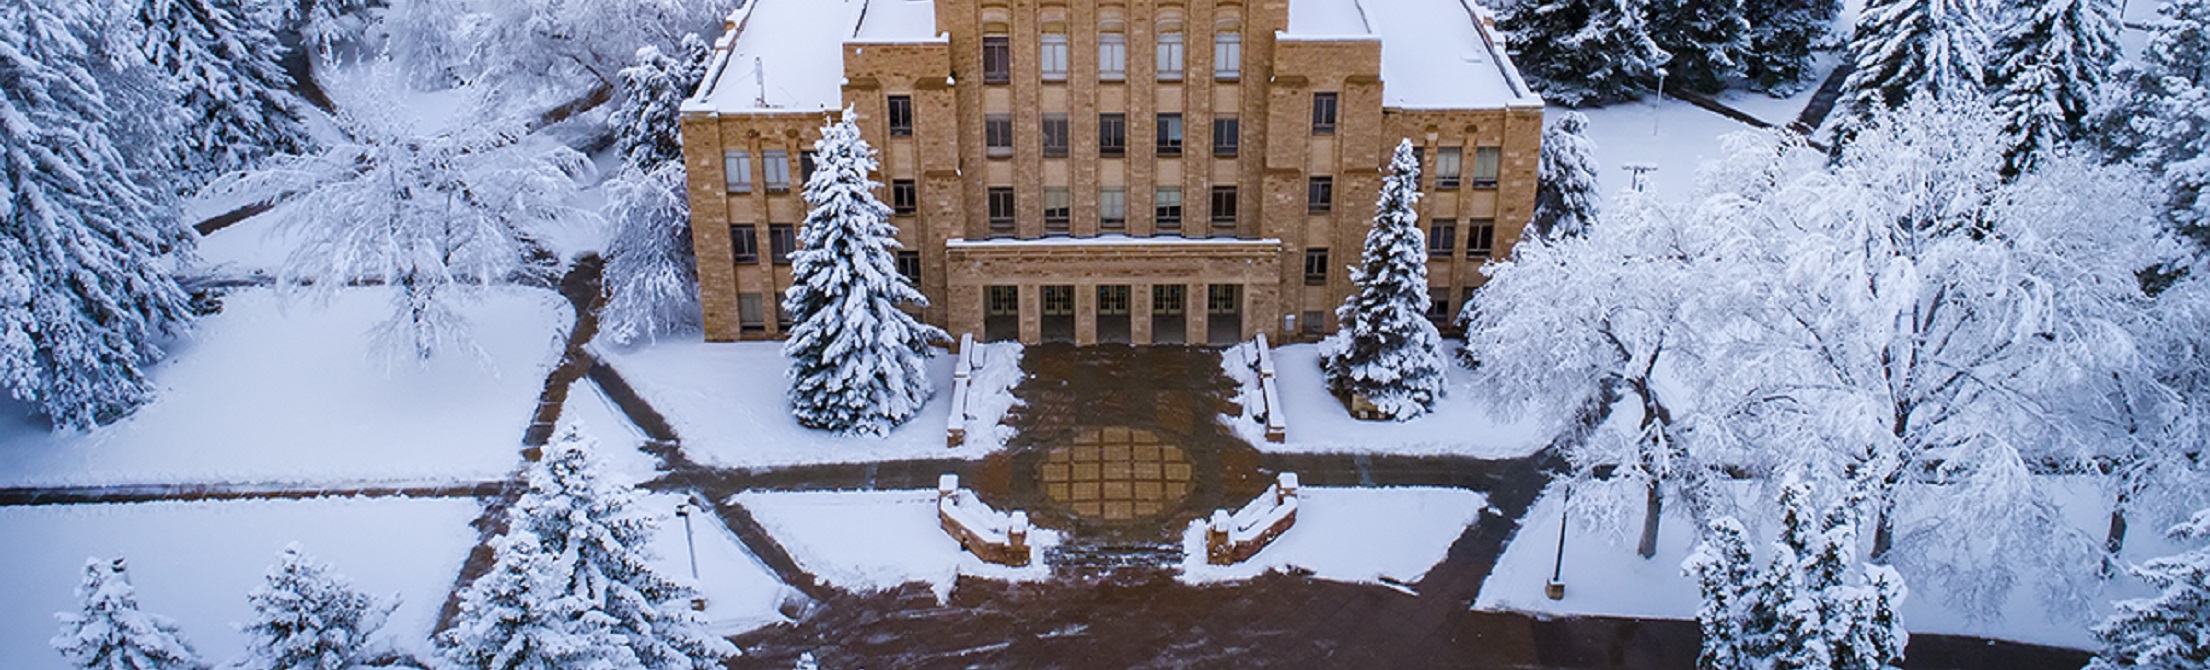 uwyo arts and sciences building during winter